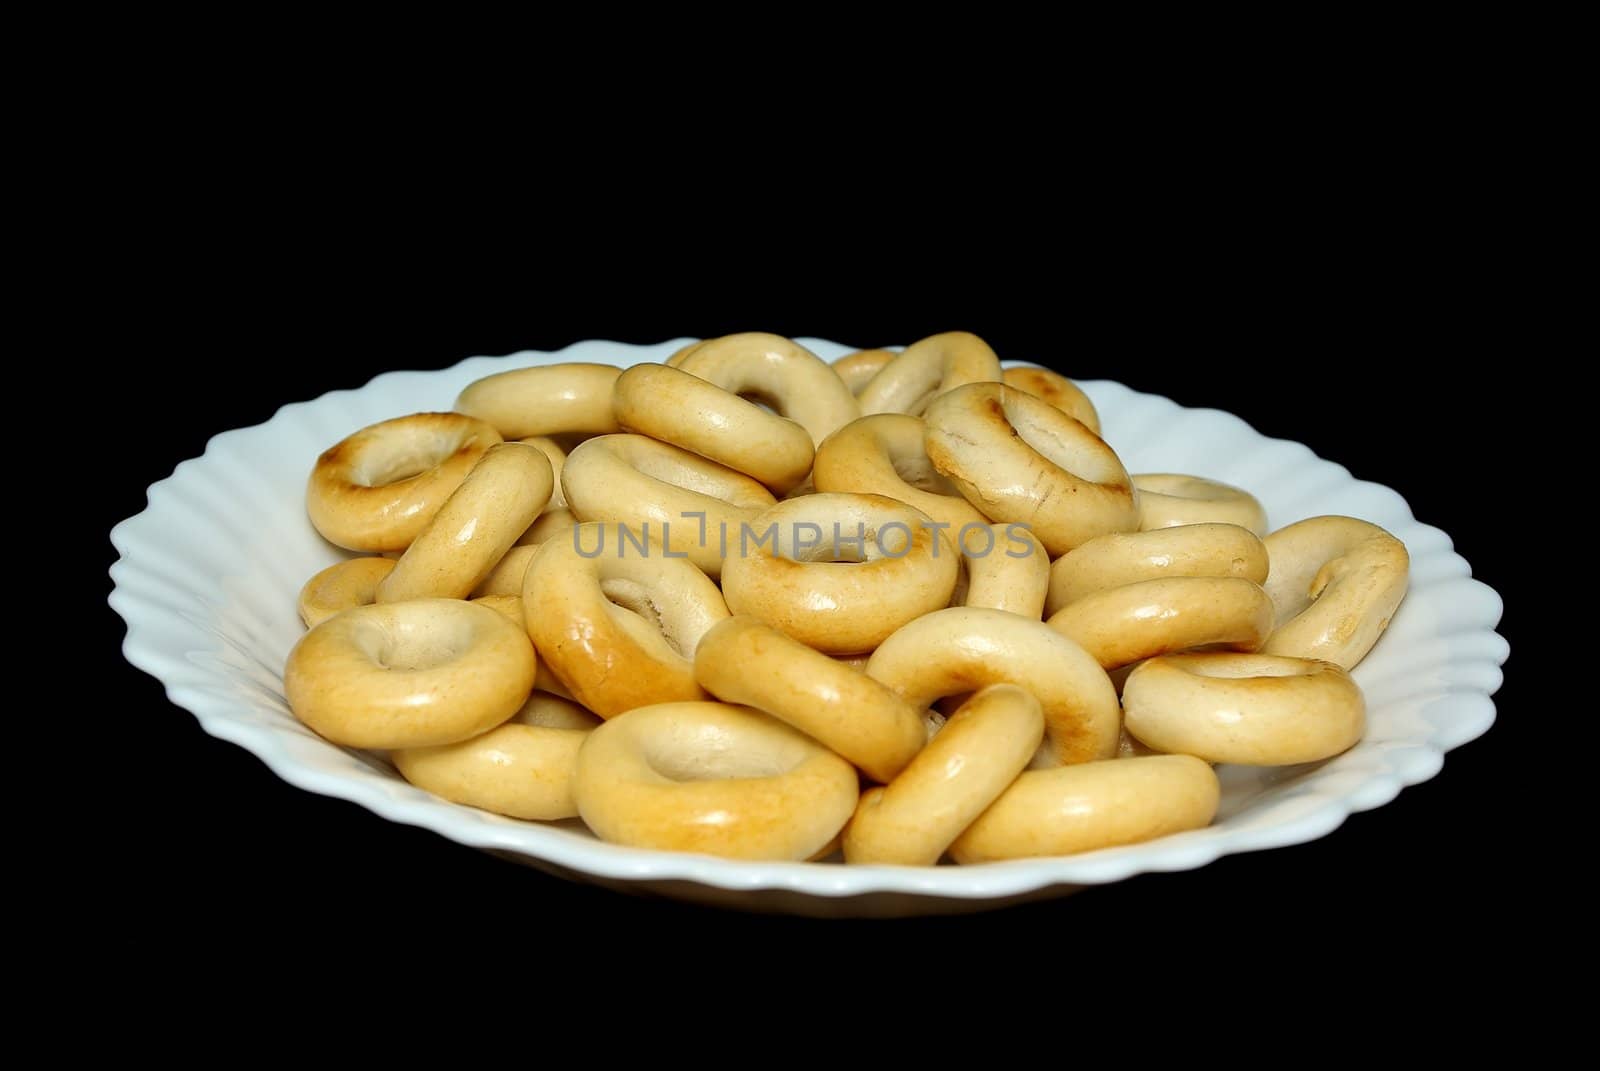 Dryings of a donut form russian meal - bread-rings on black